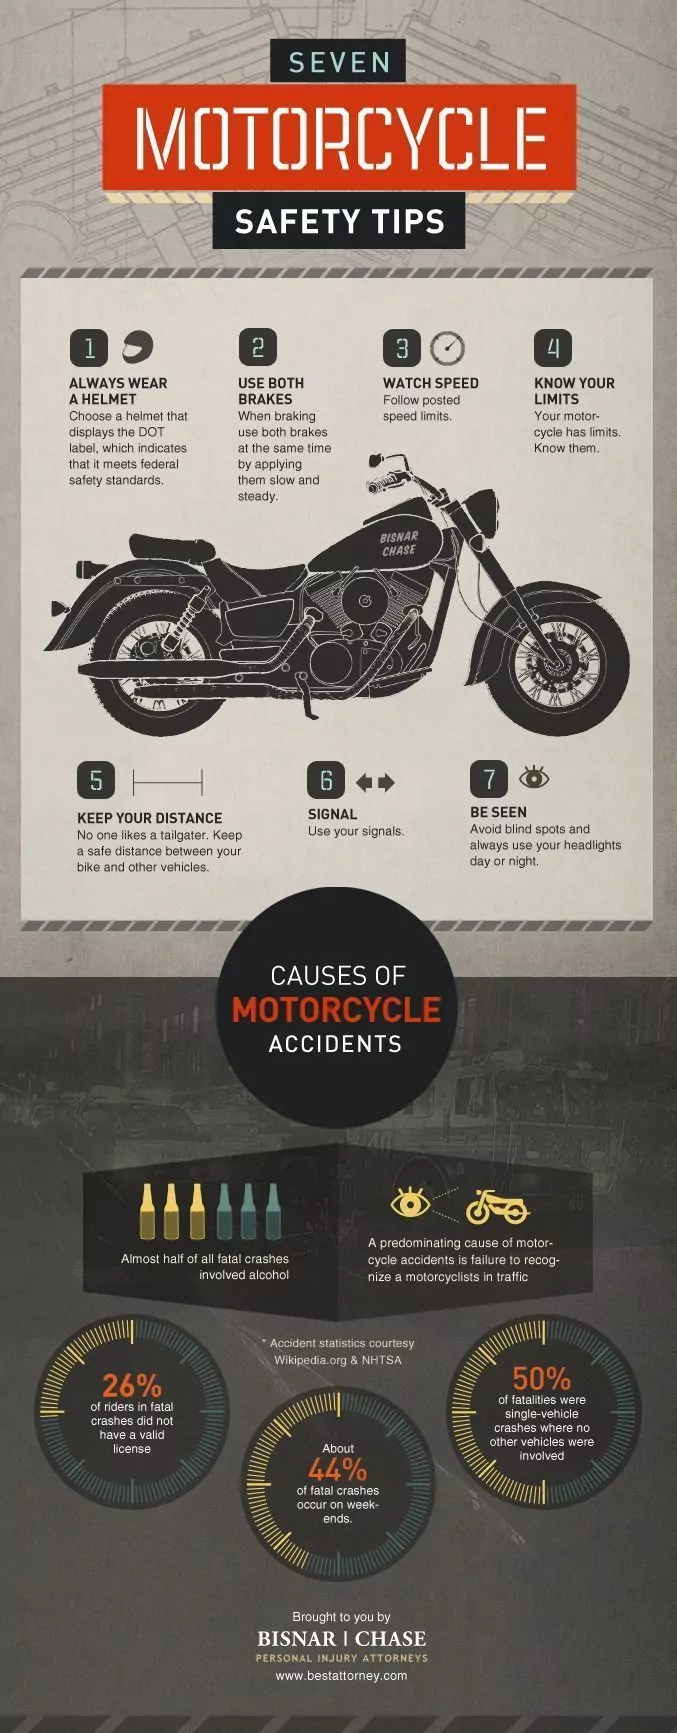 motorcycle safety tips infographic